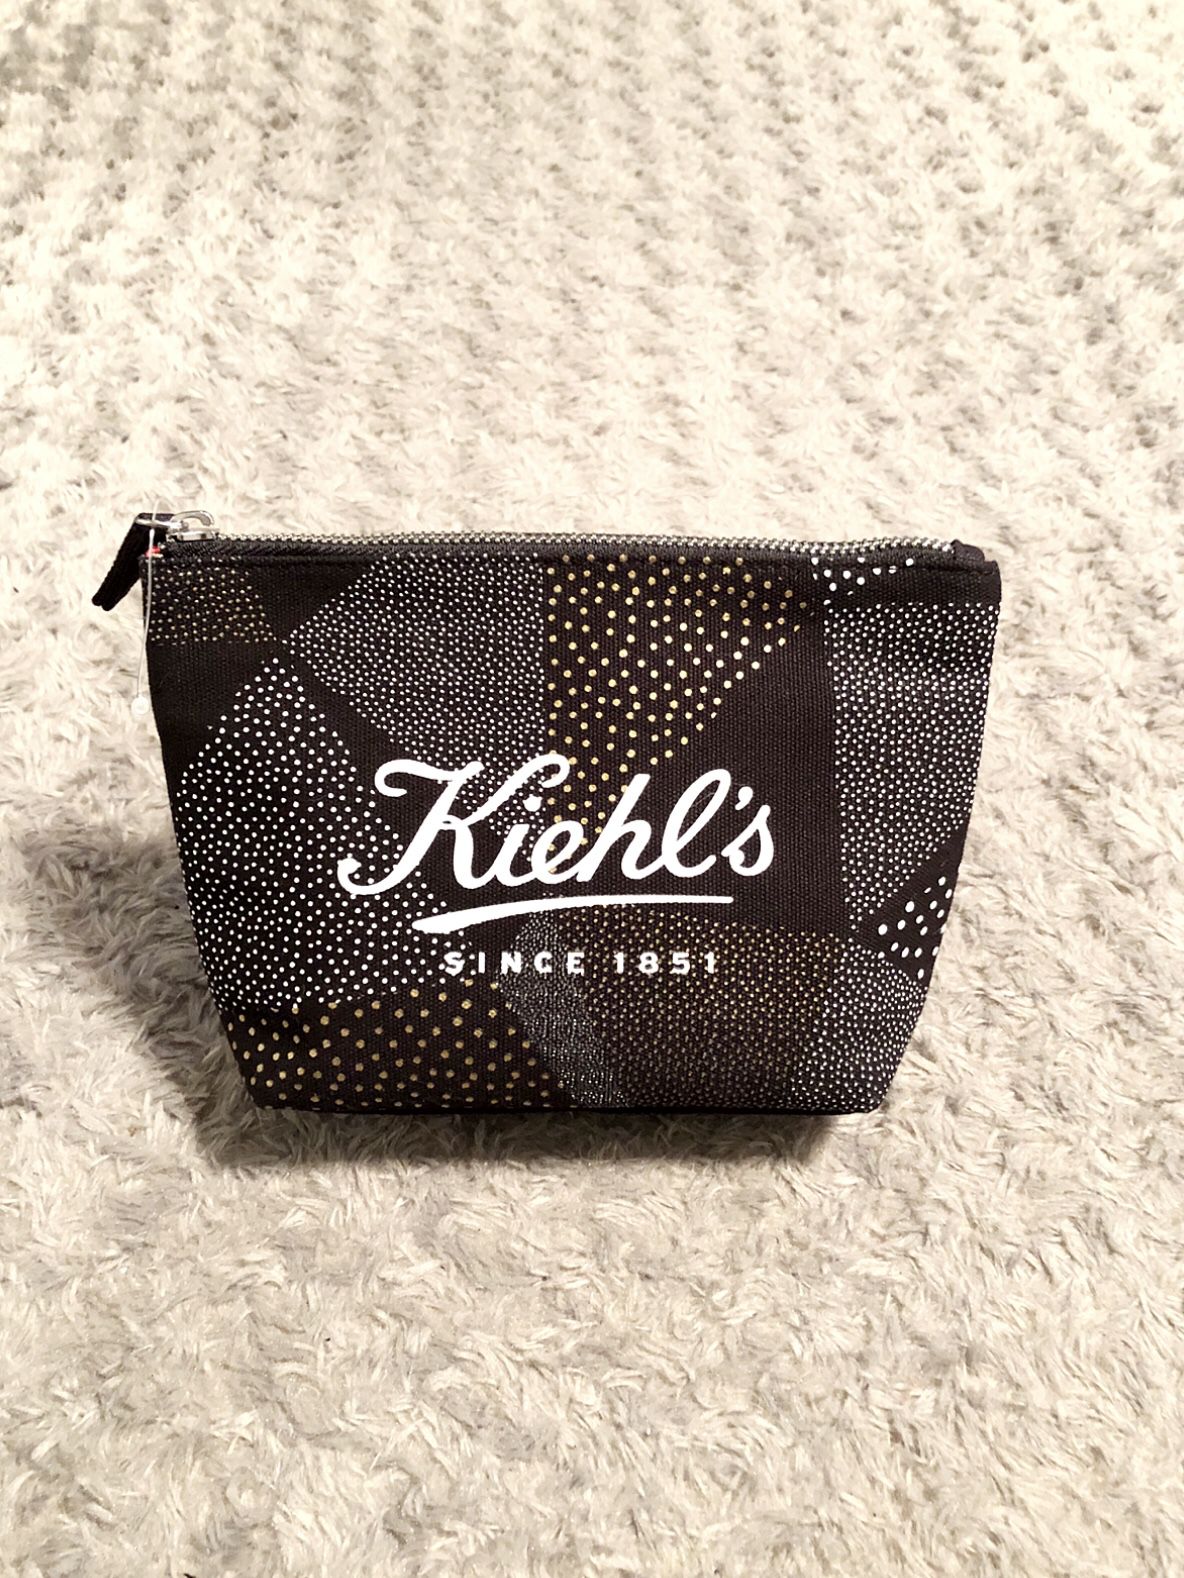 Kiehl’s Limited Edition Red Makeup Cosmetics Bag Case by Andrew Bannecker